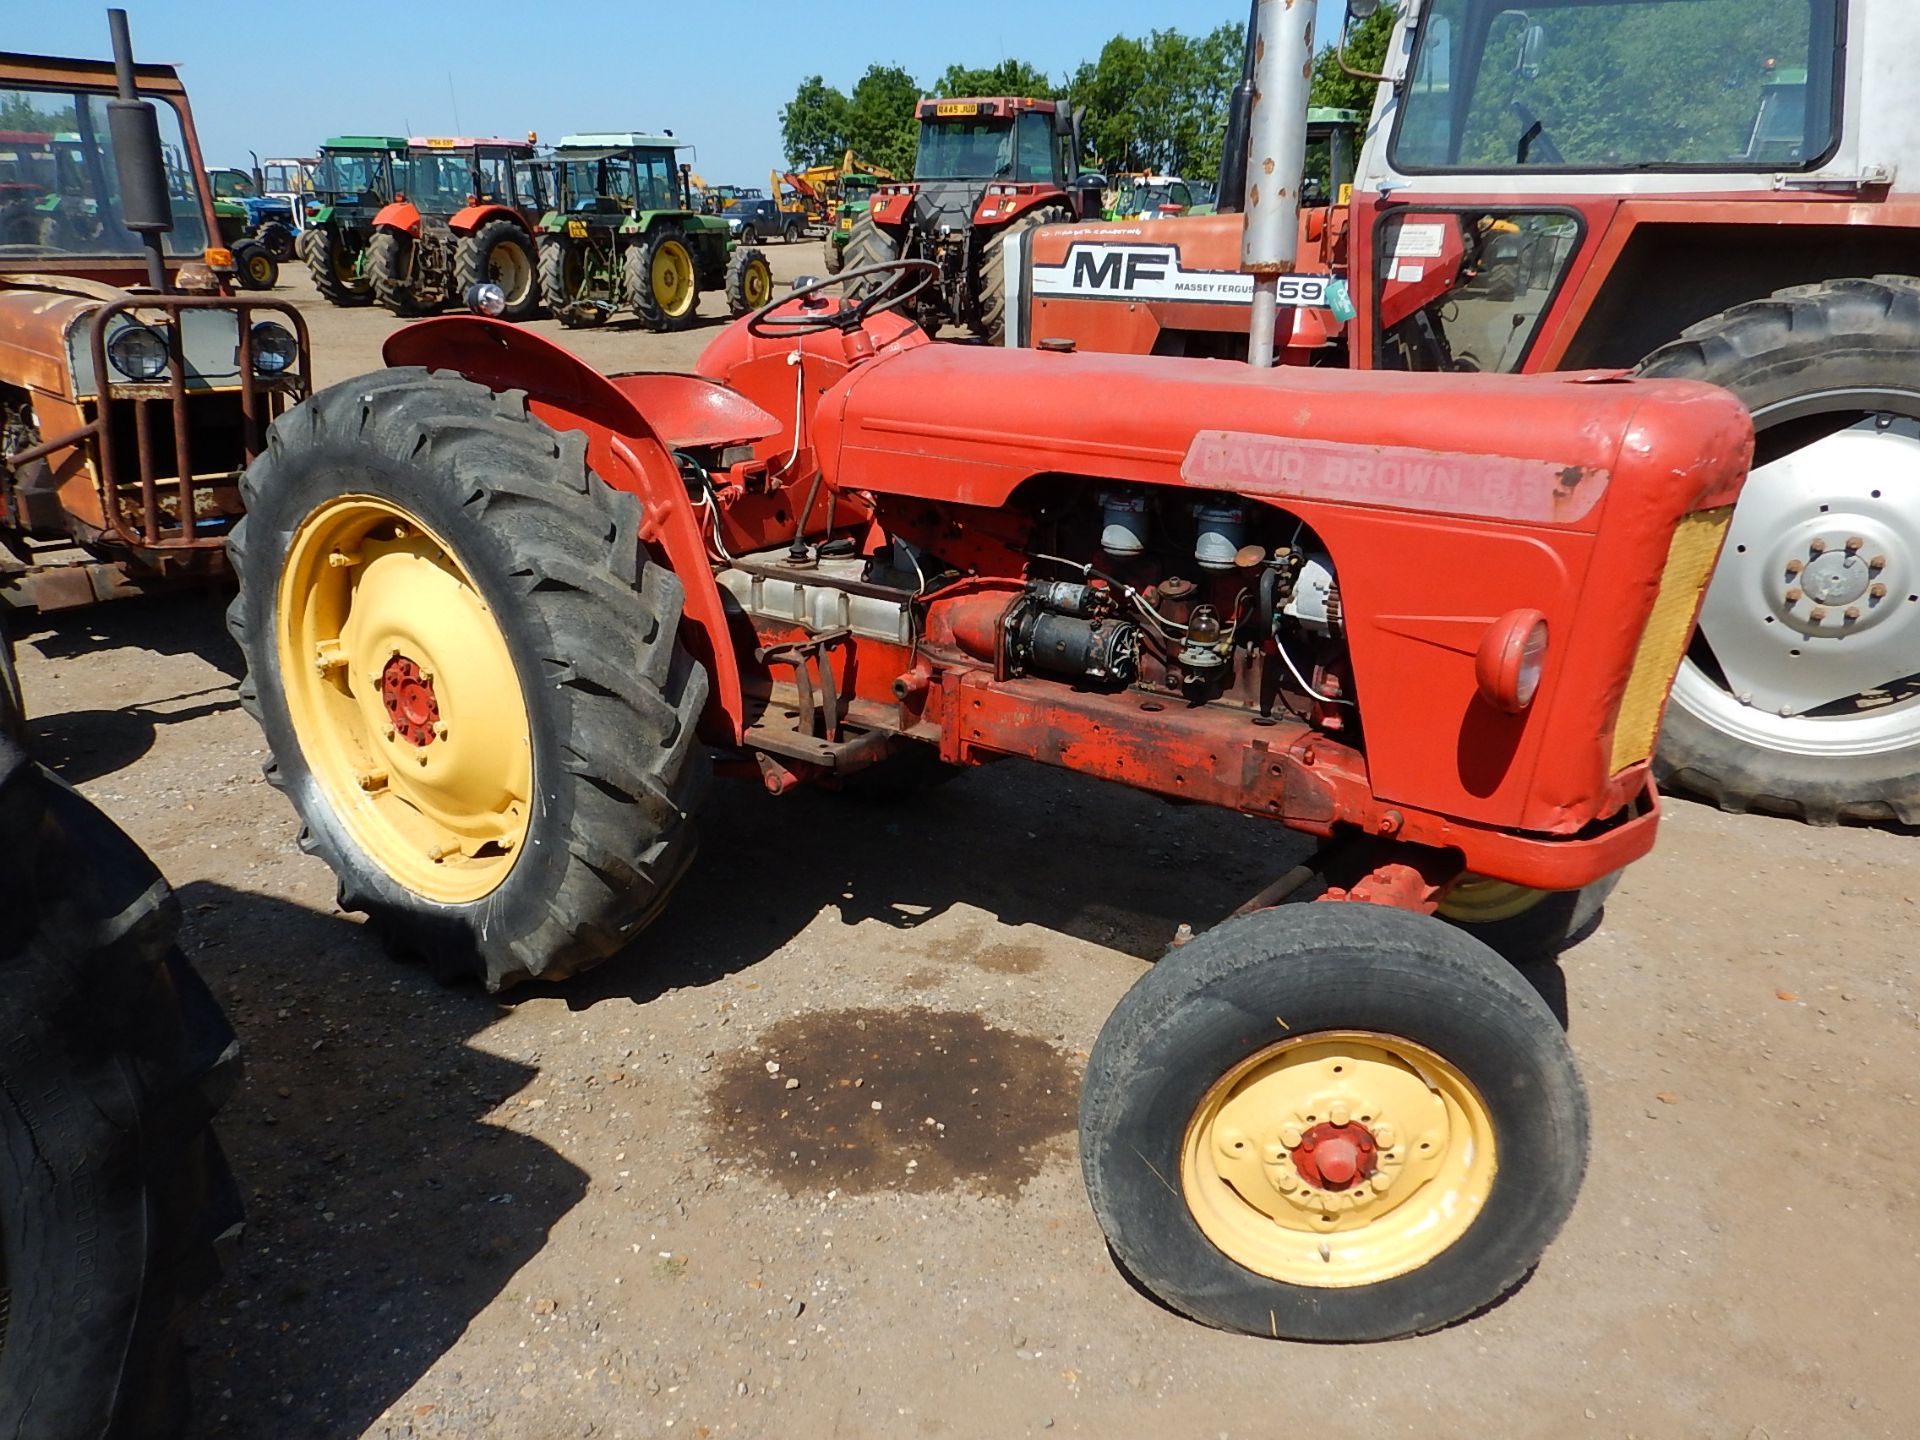 1960 DAVID BROWN 880 Implematic 4cylinder diesel TRACTOR Some early refurbishment work has been